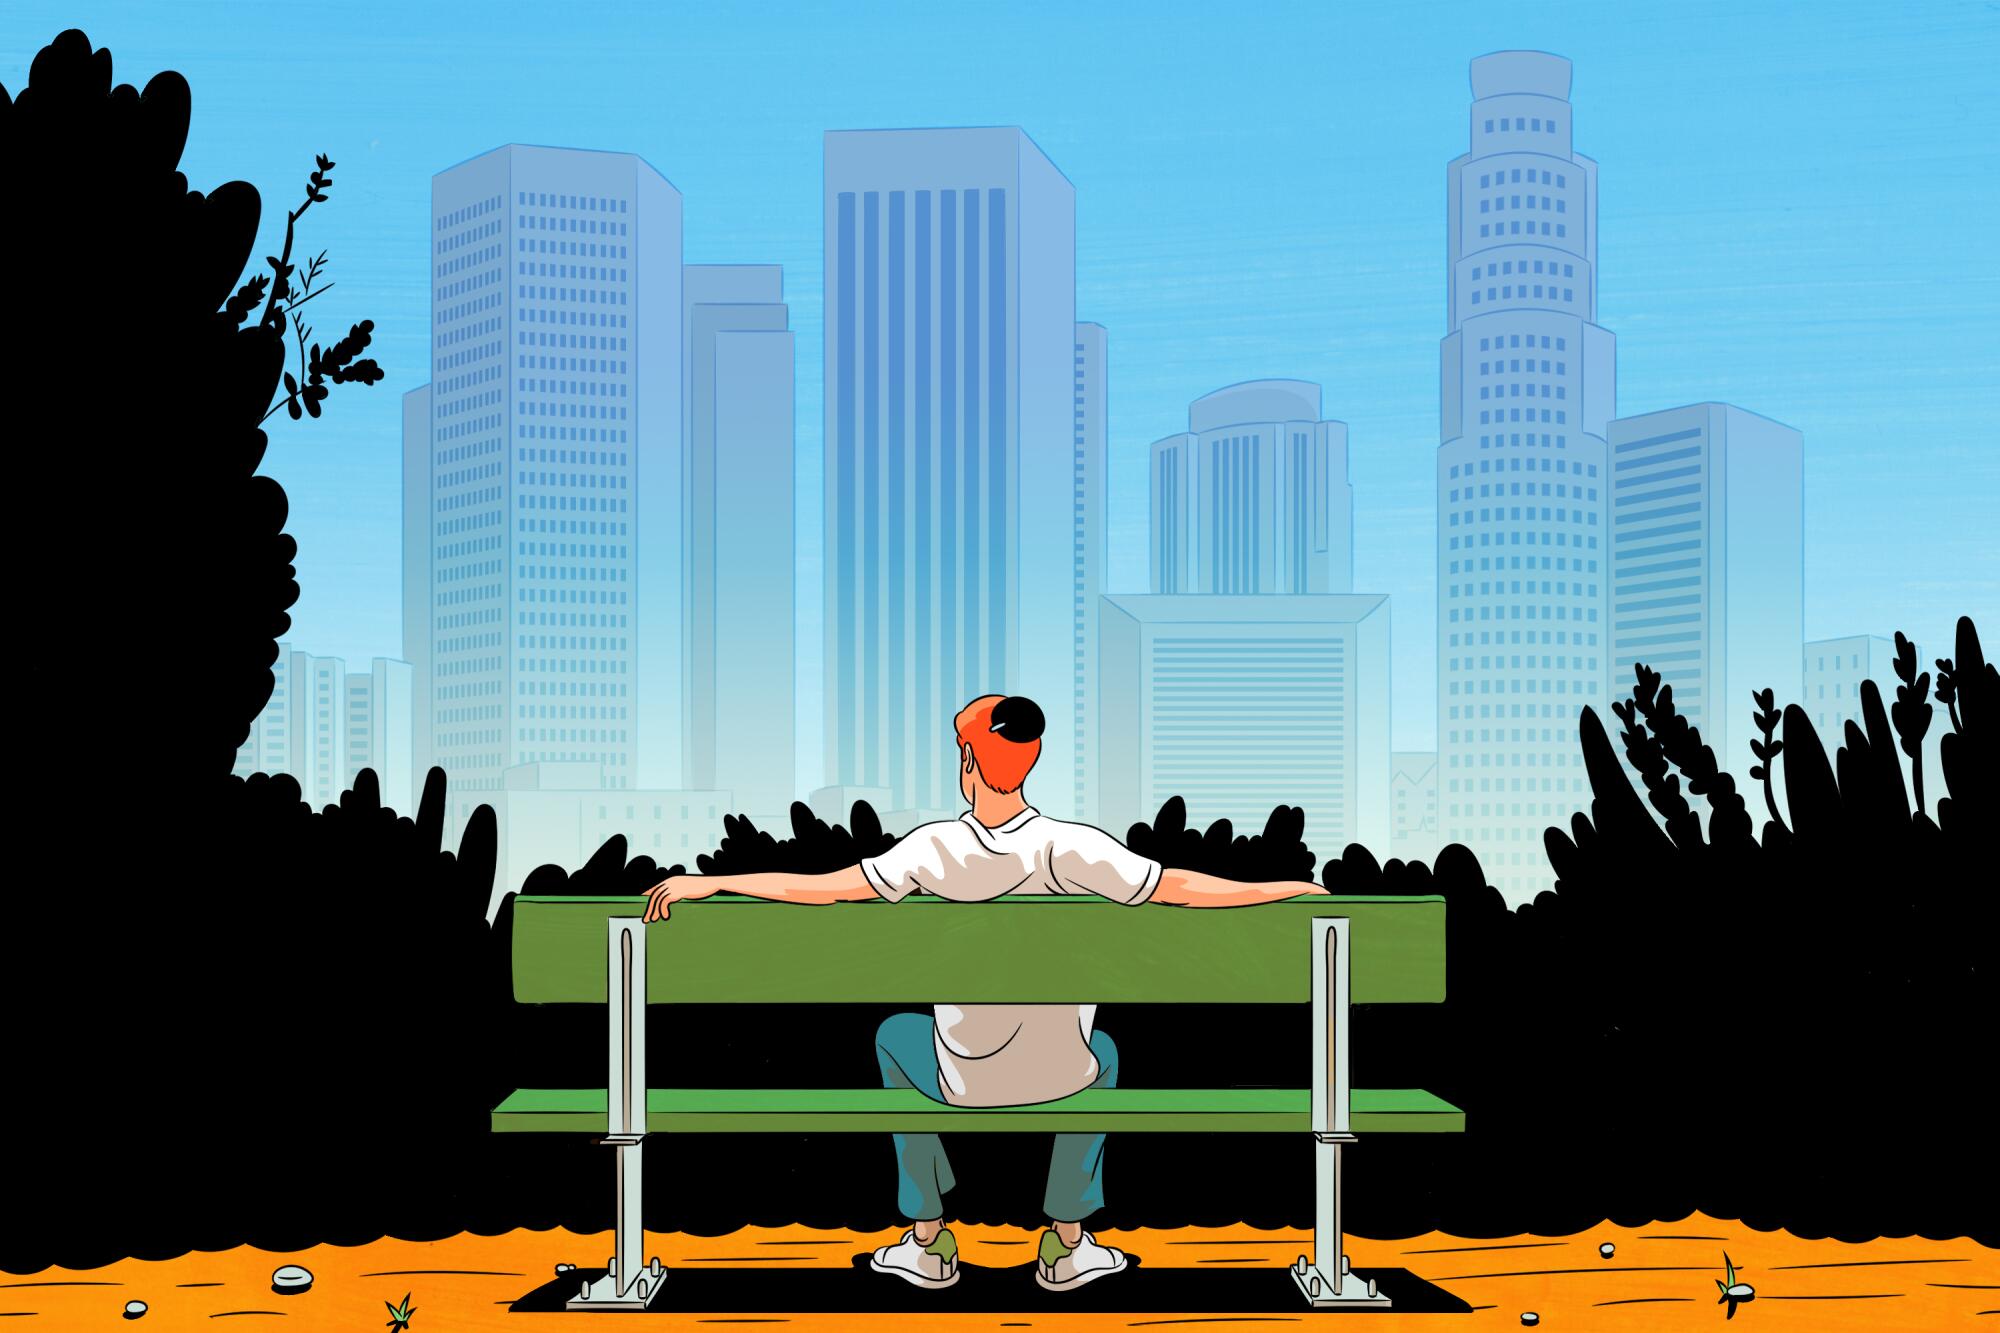 Illustration of a Jewish man sitting on a park bench looking out towards the Los Angeles skyline.